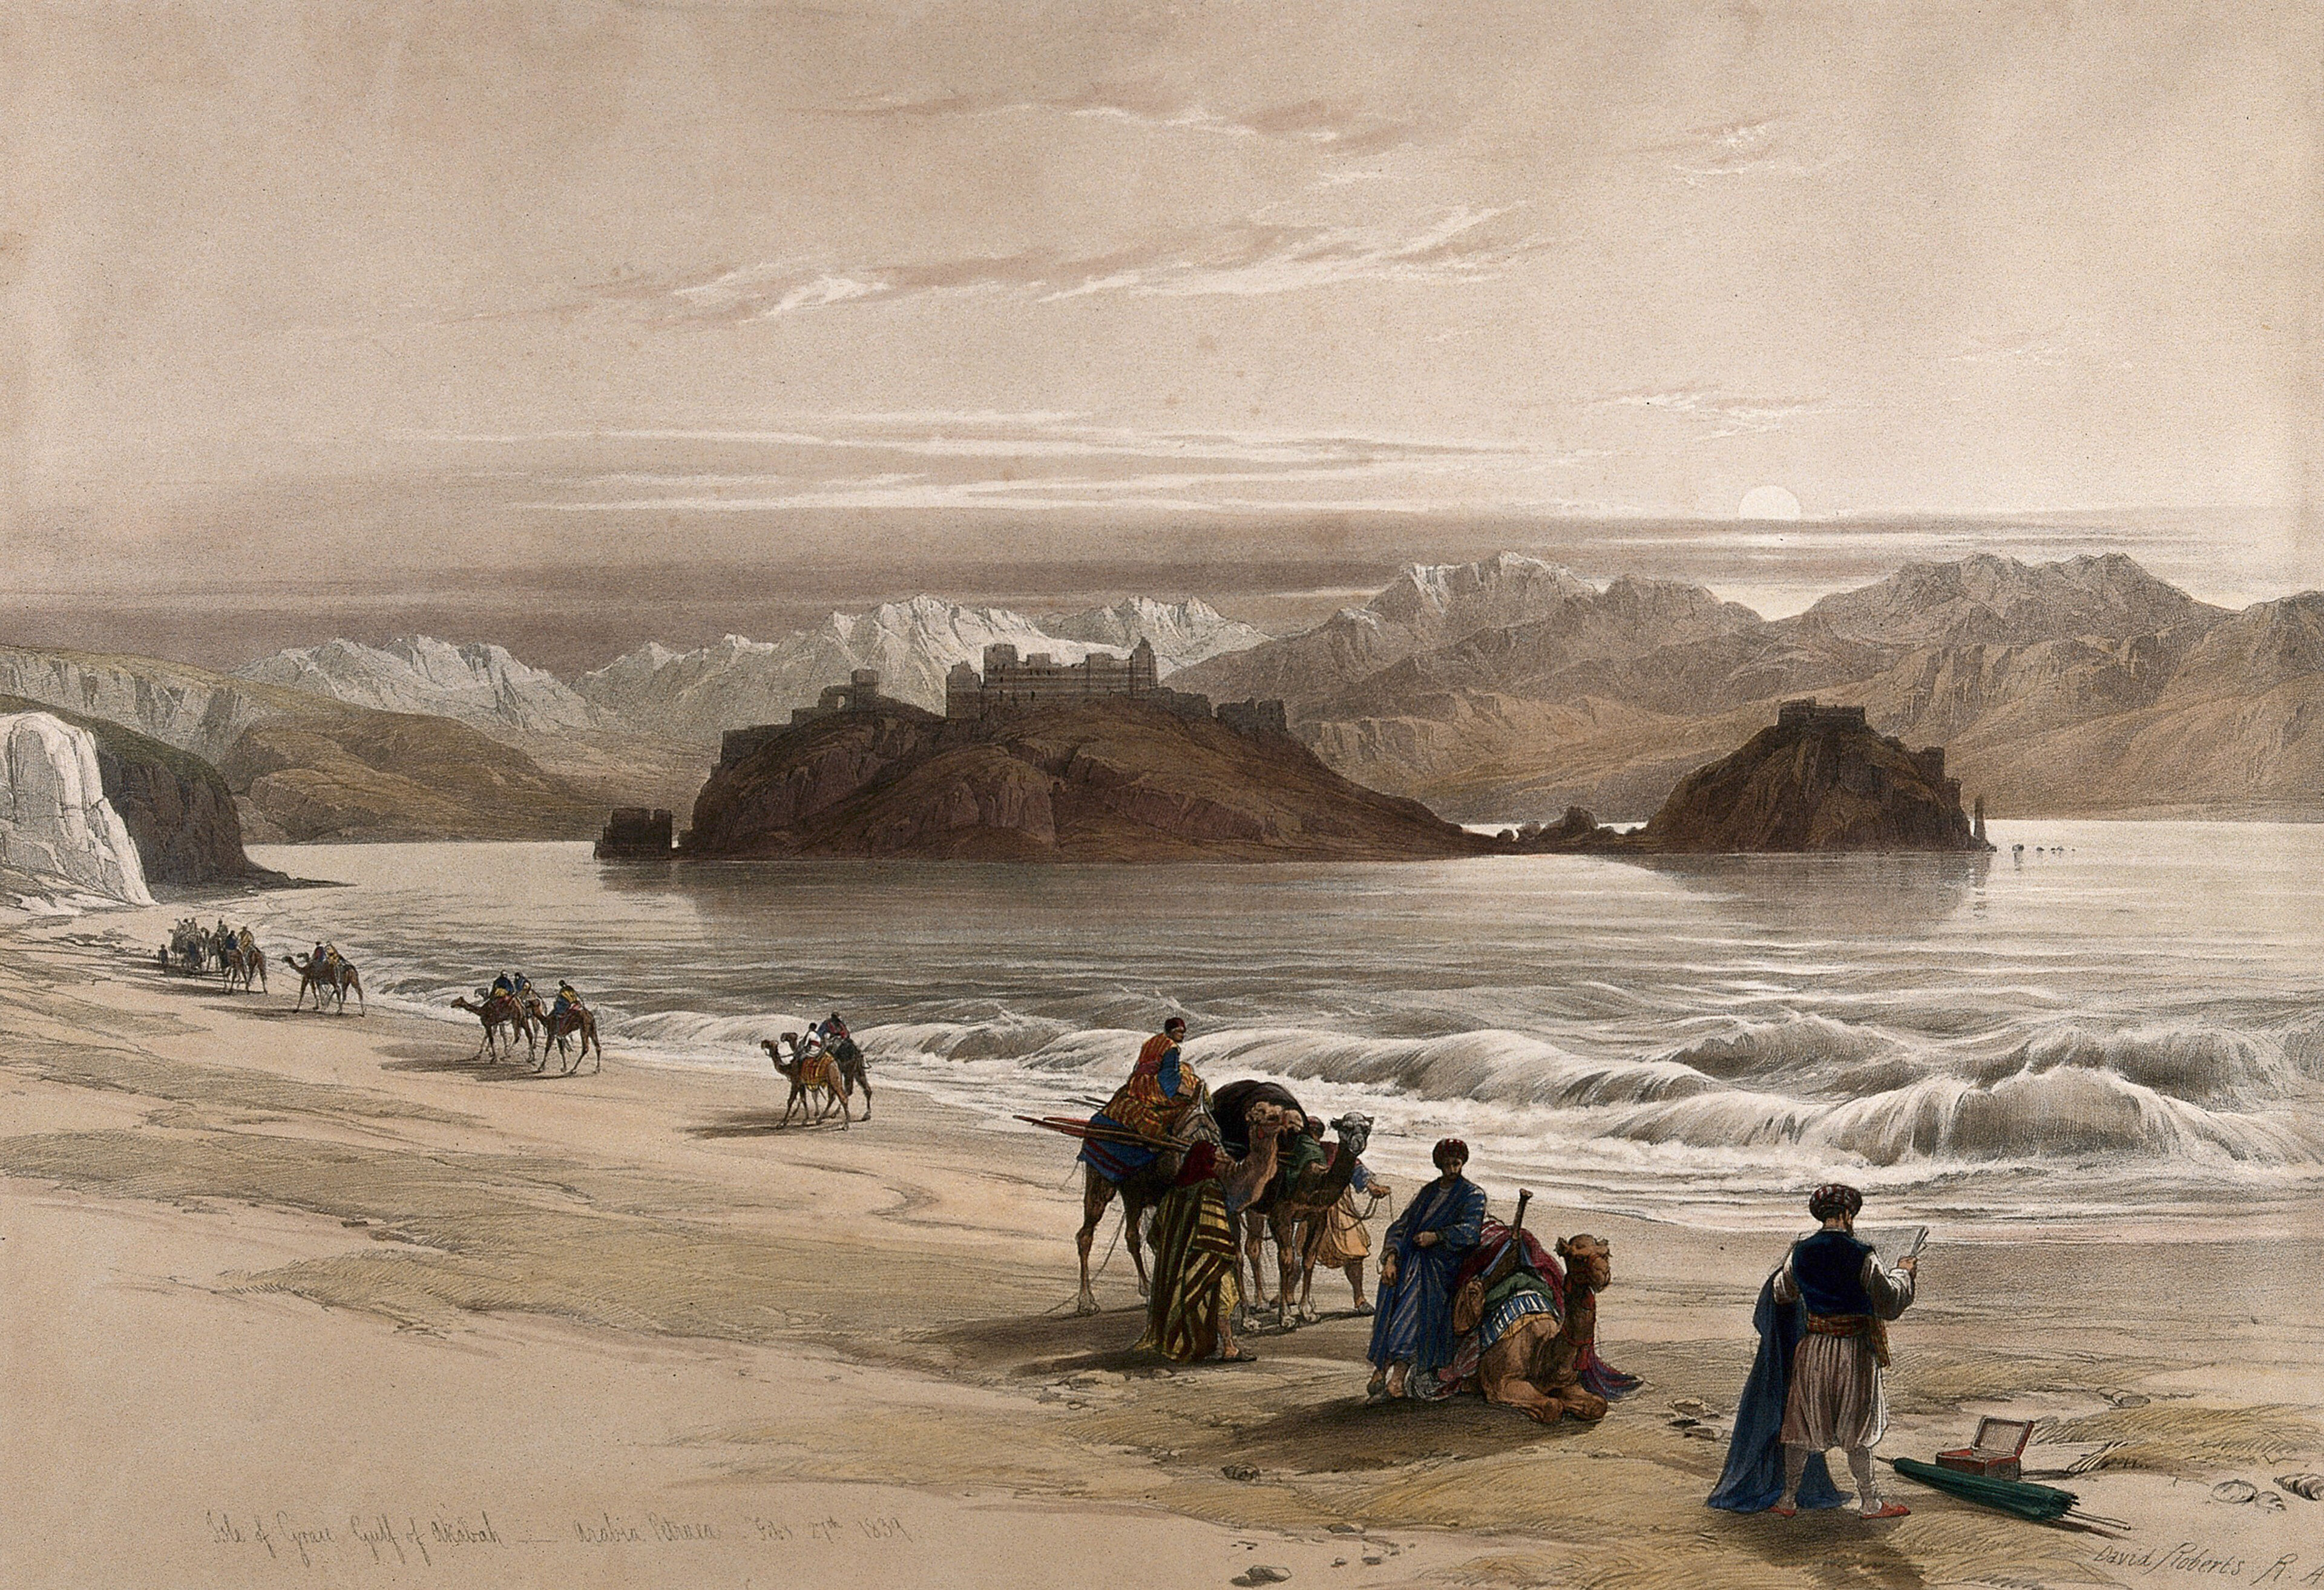 The island known as Graia, in the Gulf of Akabah, at sunset. Coloured lithograph by Louis Haghe after David Roberts, 1849.